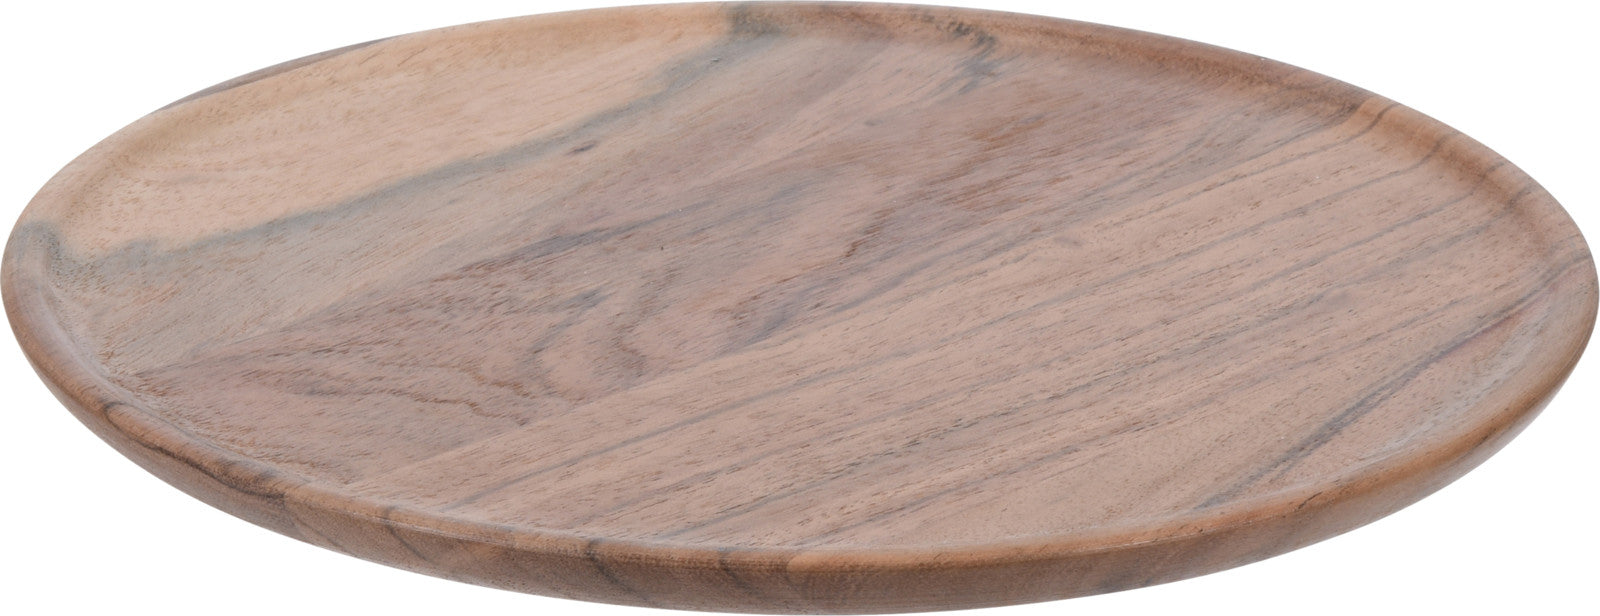 Candle Plate Round Acacia Wood 220mm